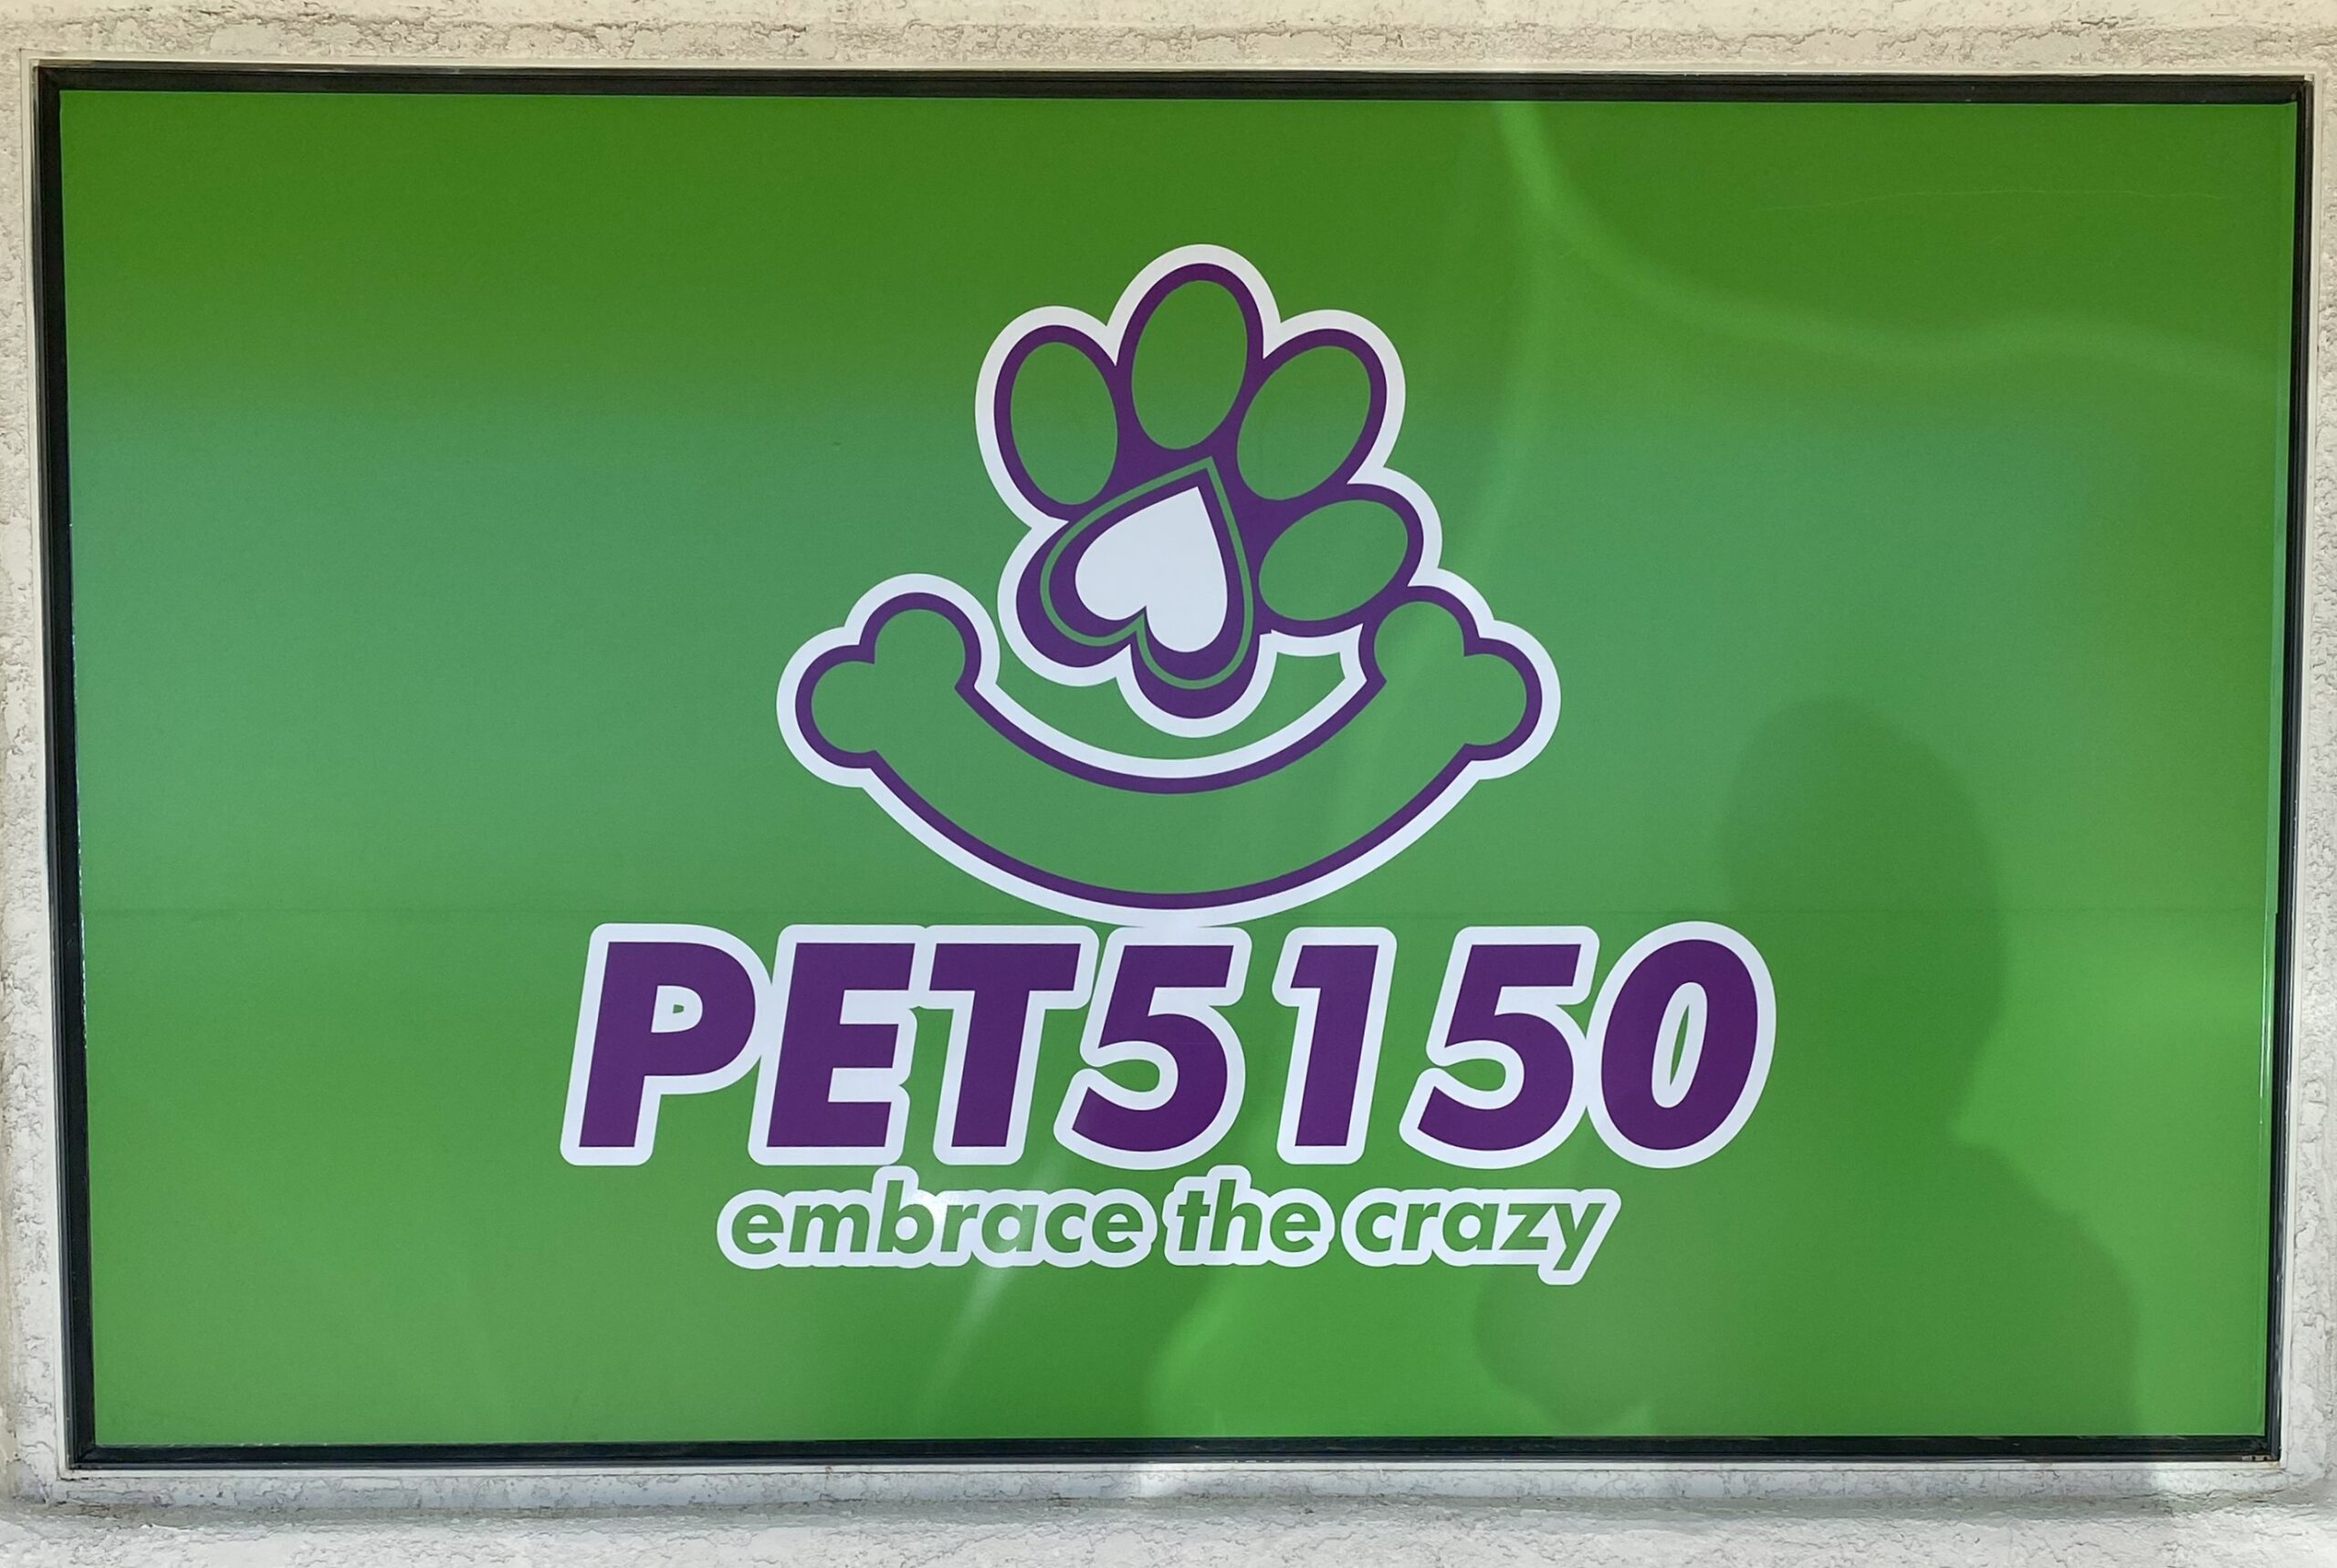 Window sign in Ft. Mohave, AZ that says pets150 embrace the crazy.